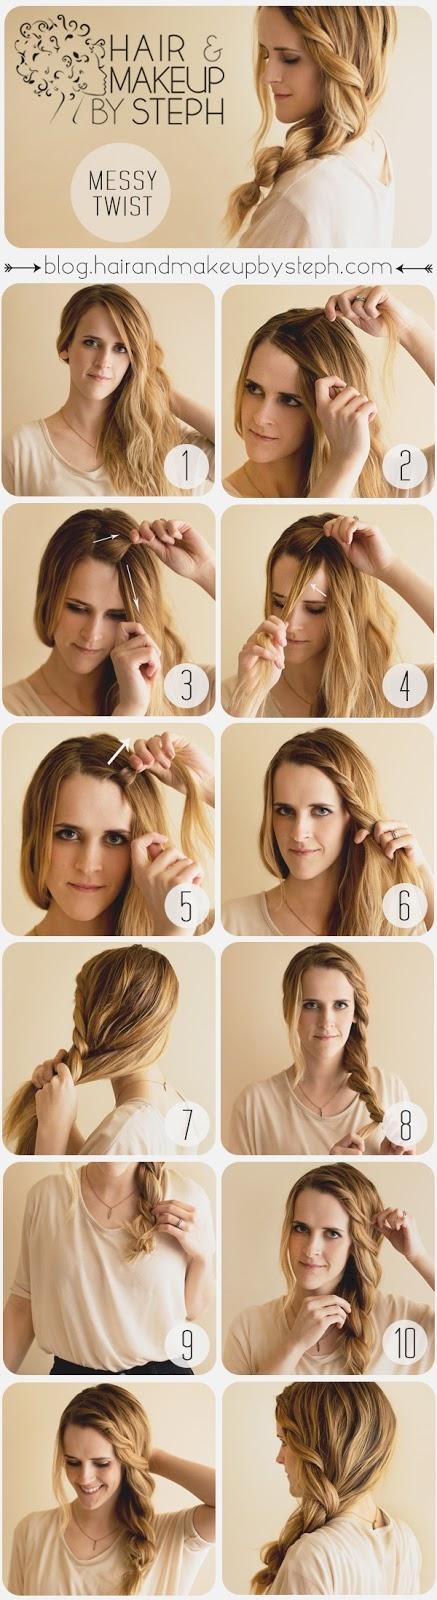 Easy Messy Twist Hairstyle Tutorial